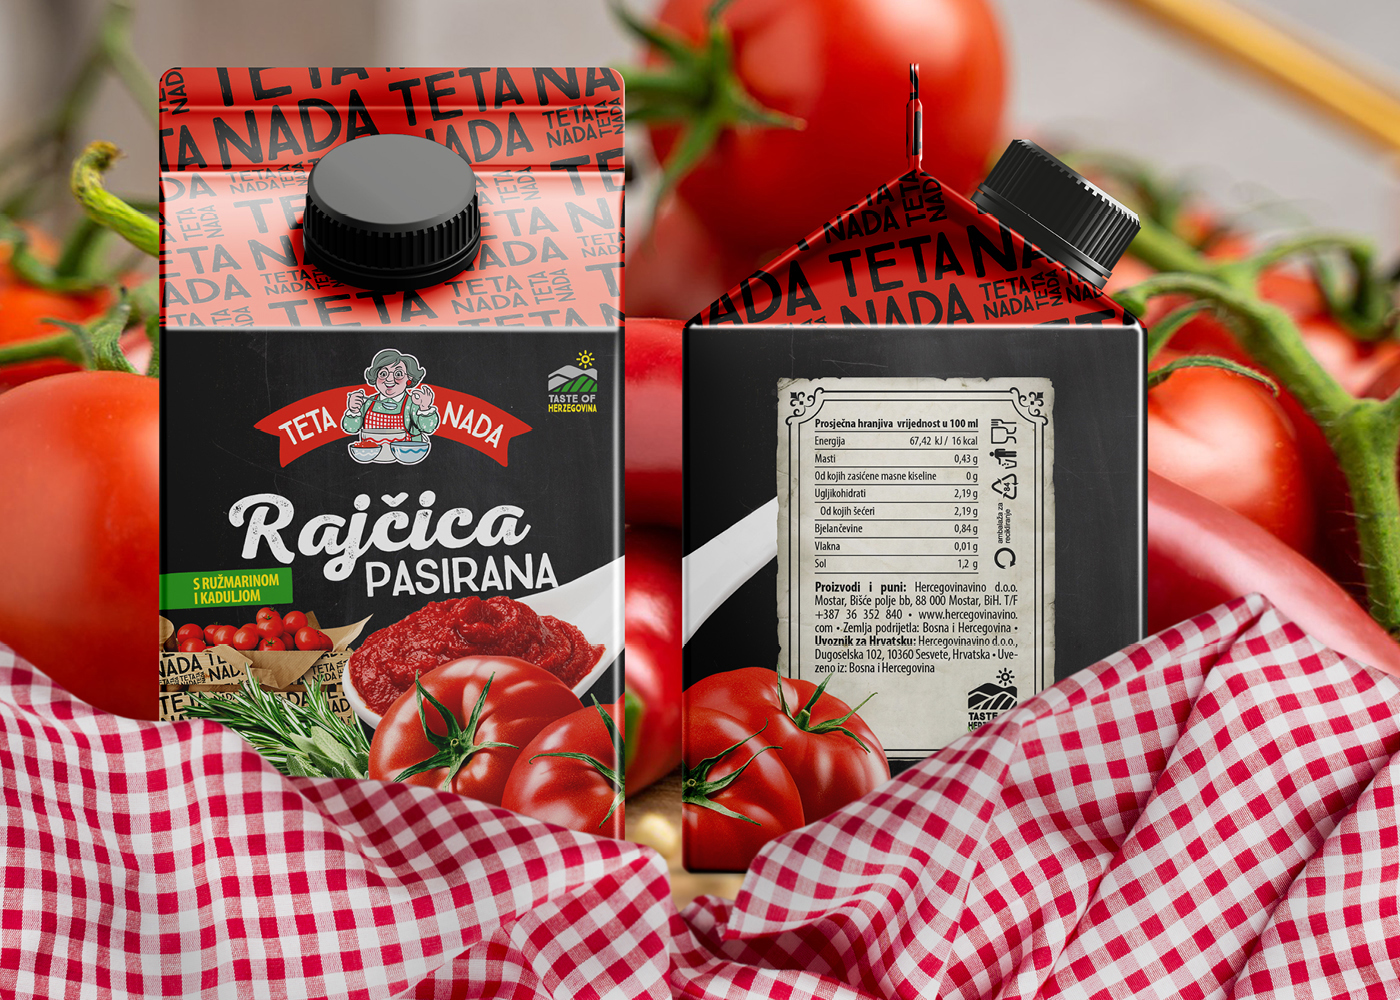 Brand Identity and Packaging Design for a Product Line "Teta Nada"